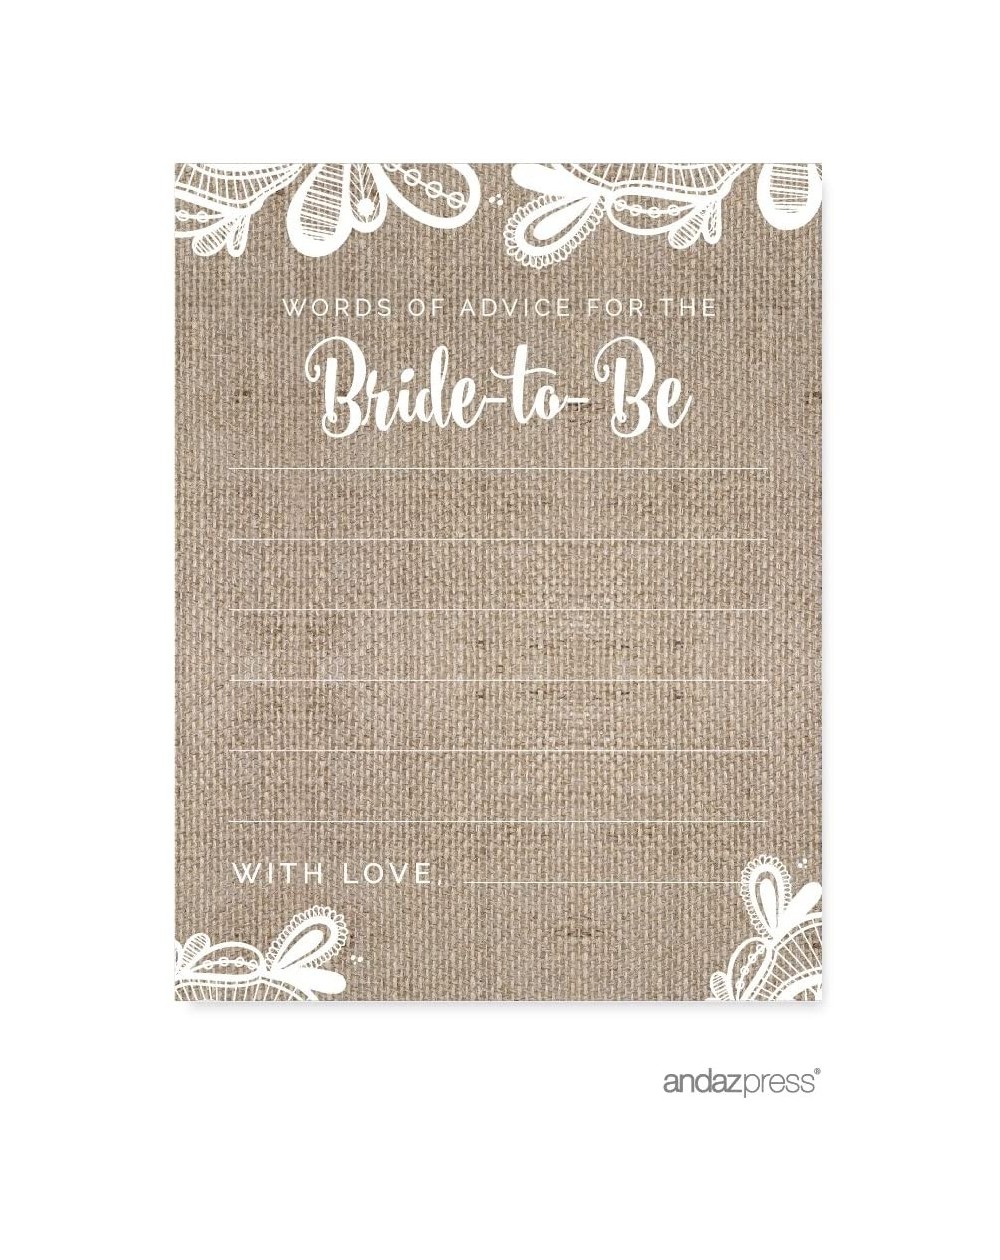 Favors Burlap Lace Wedding Collection- Blank Words of Wisdom for The Bride-to-Be Bridal Shower Cards- 20-Pack - Cards Words o...